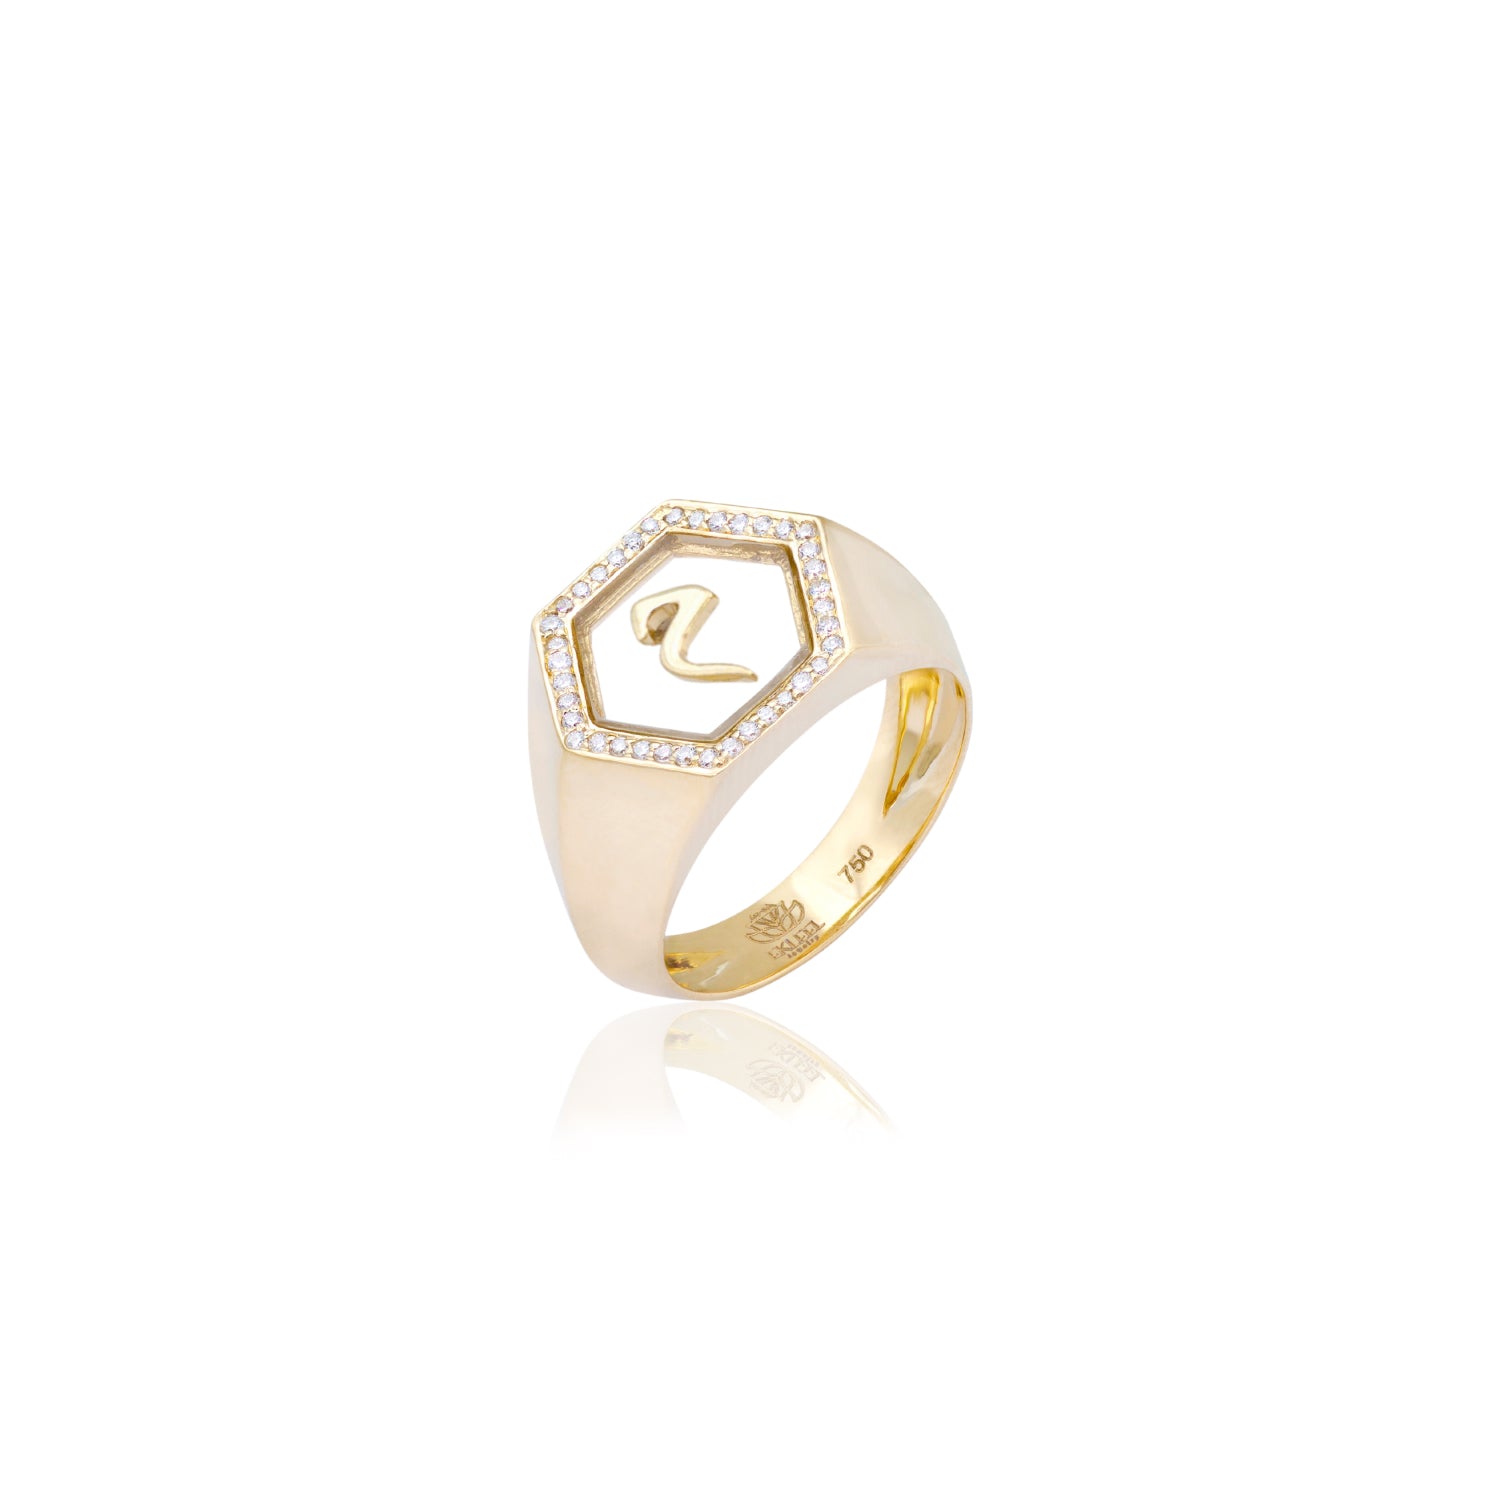 Qamoos 2.0 Letter م Plexiglass and Diamond Signet Ring in Yellow Gold